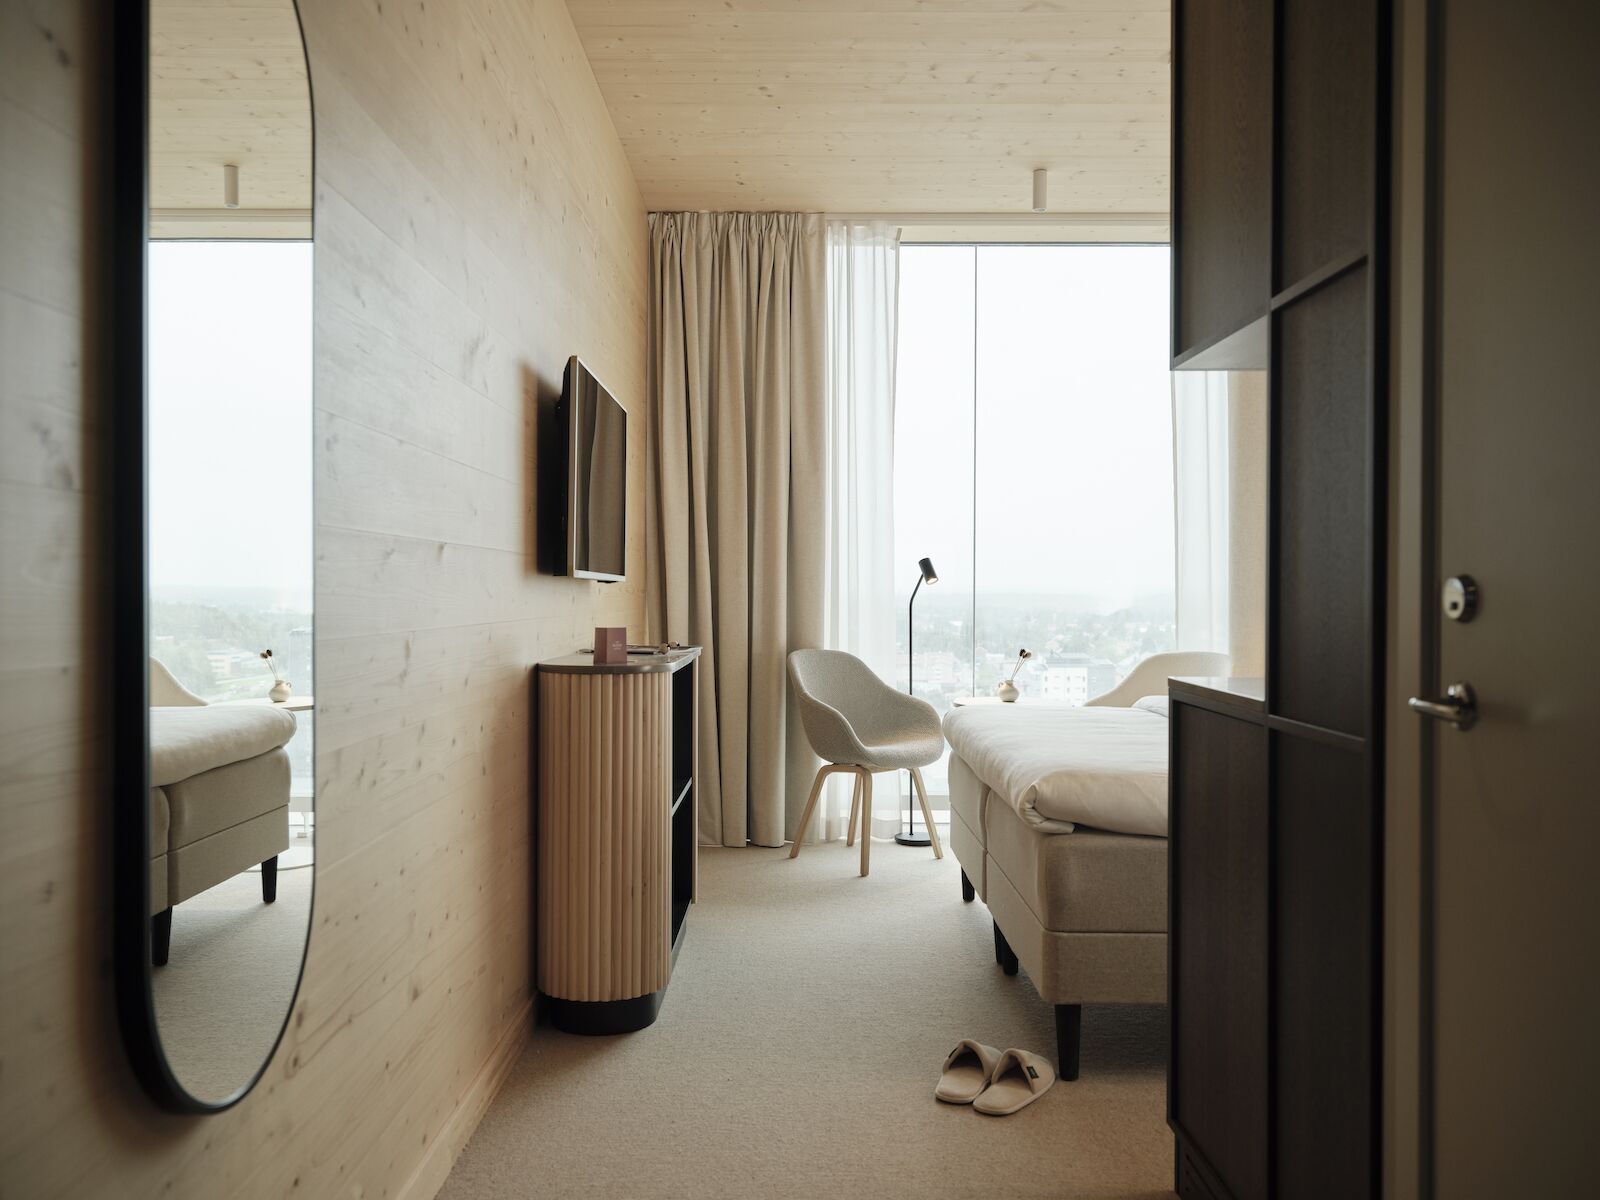 View of a room at the Wood Hotel in Sweden